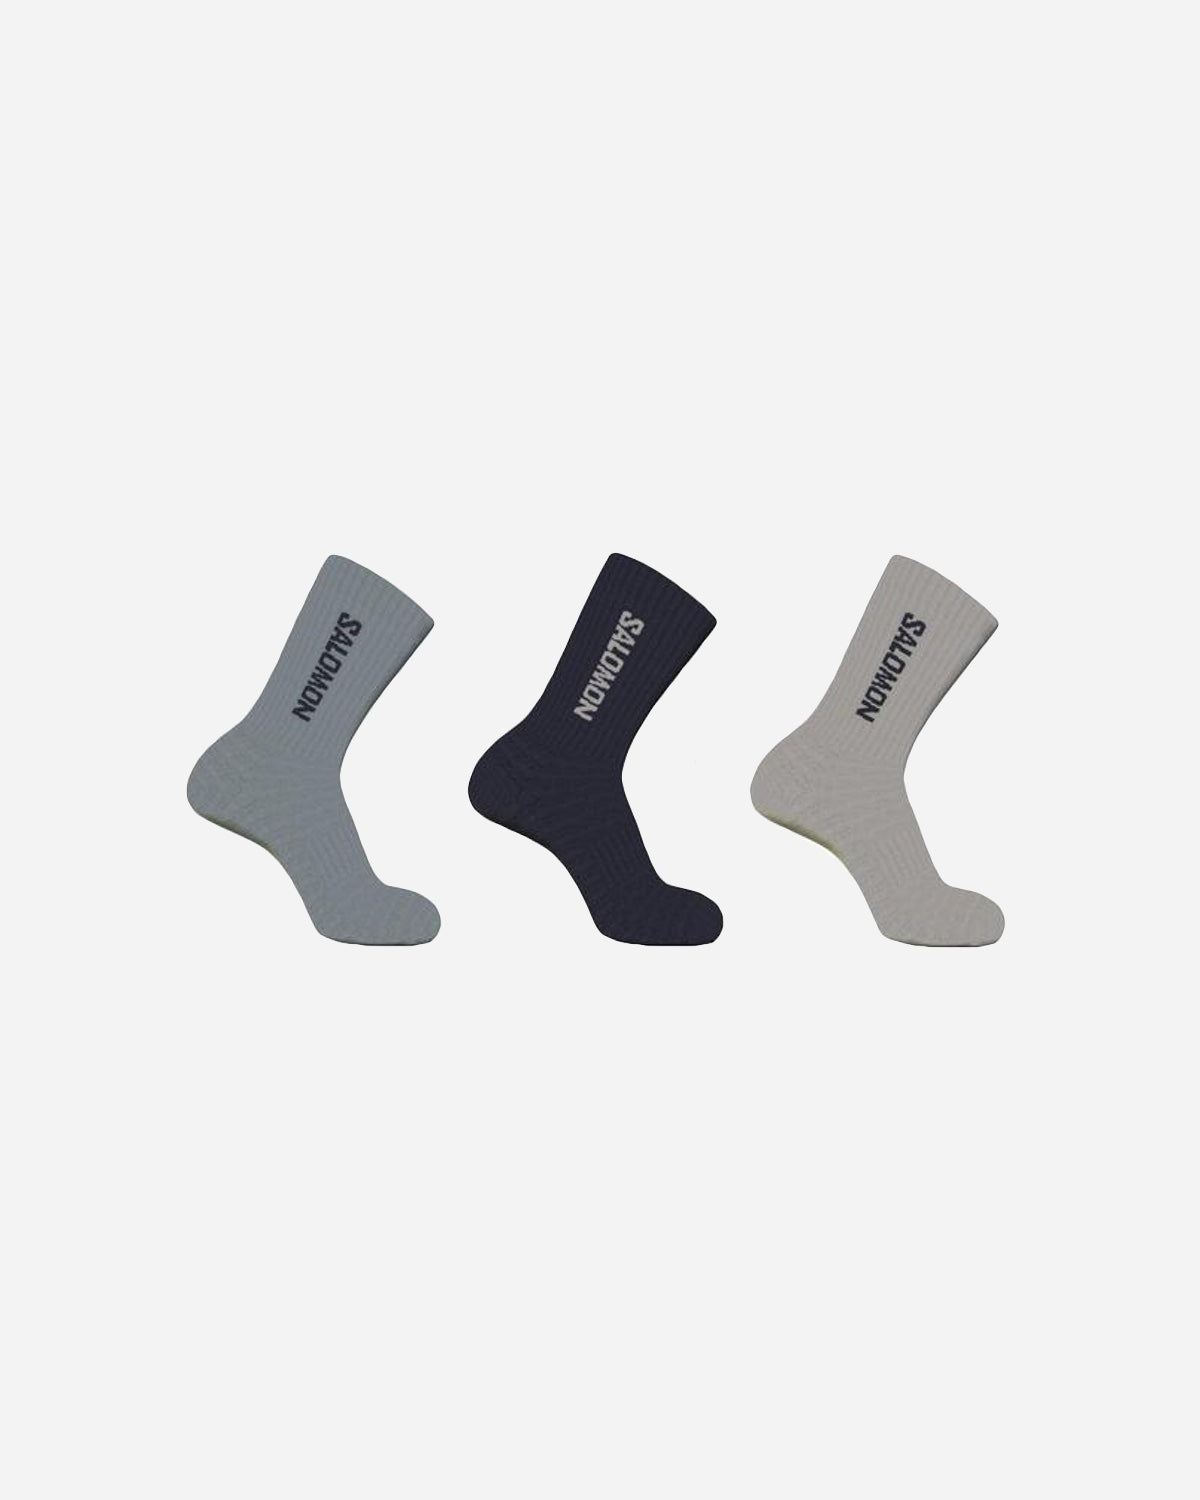 Everyday Crew 3-Pack - Carbon / Ghost Gray